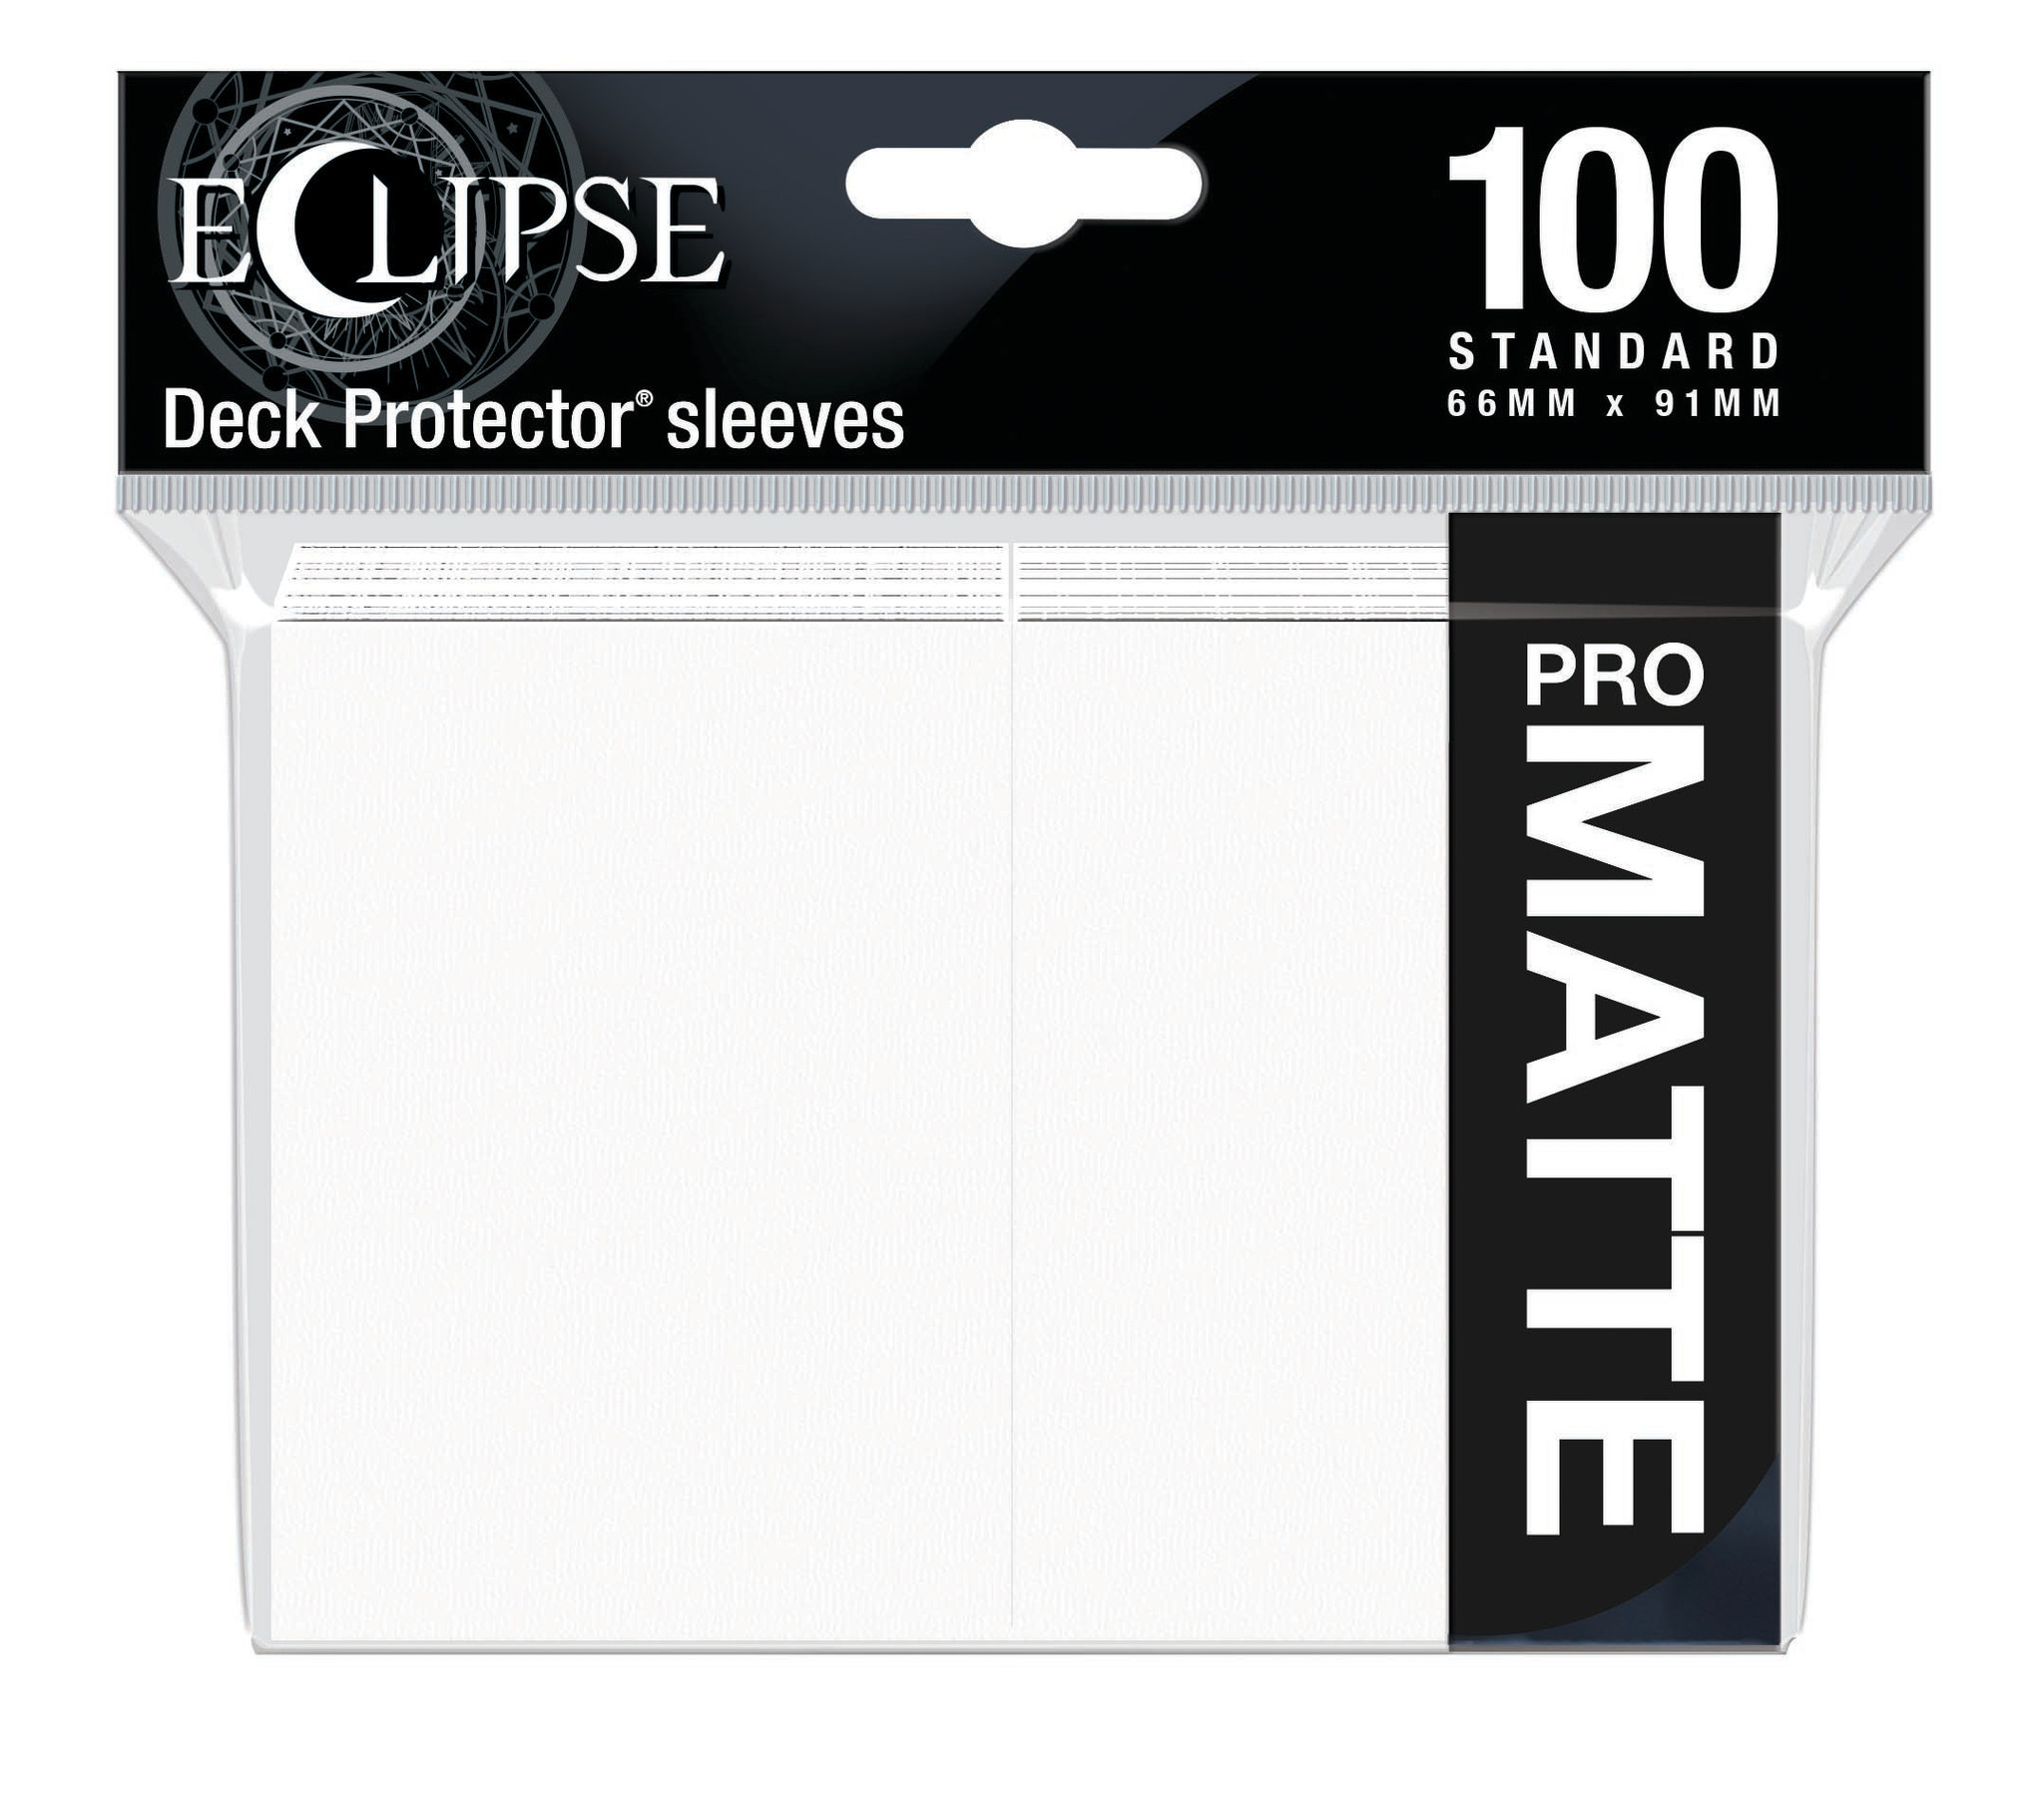 Ultra Pro - 66mm X 91mm - Eclipse Matte Sleeves - Arctic White 100 ct.